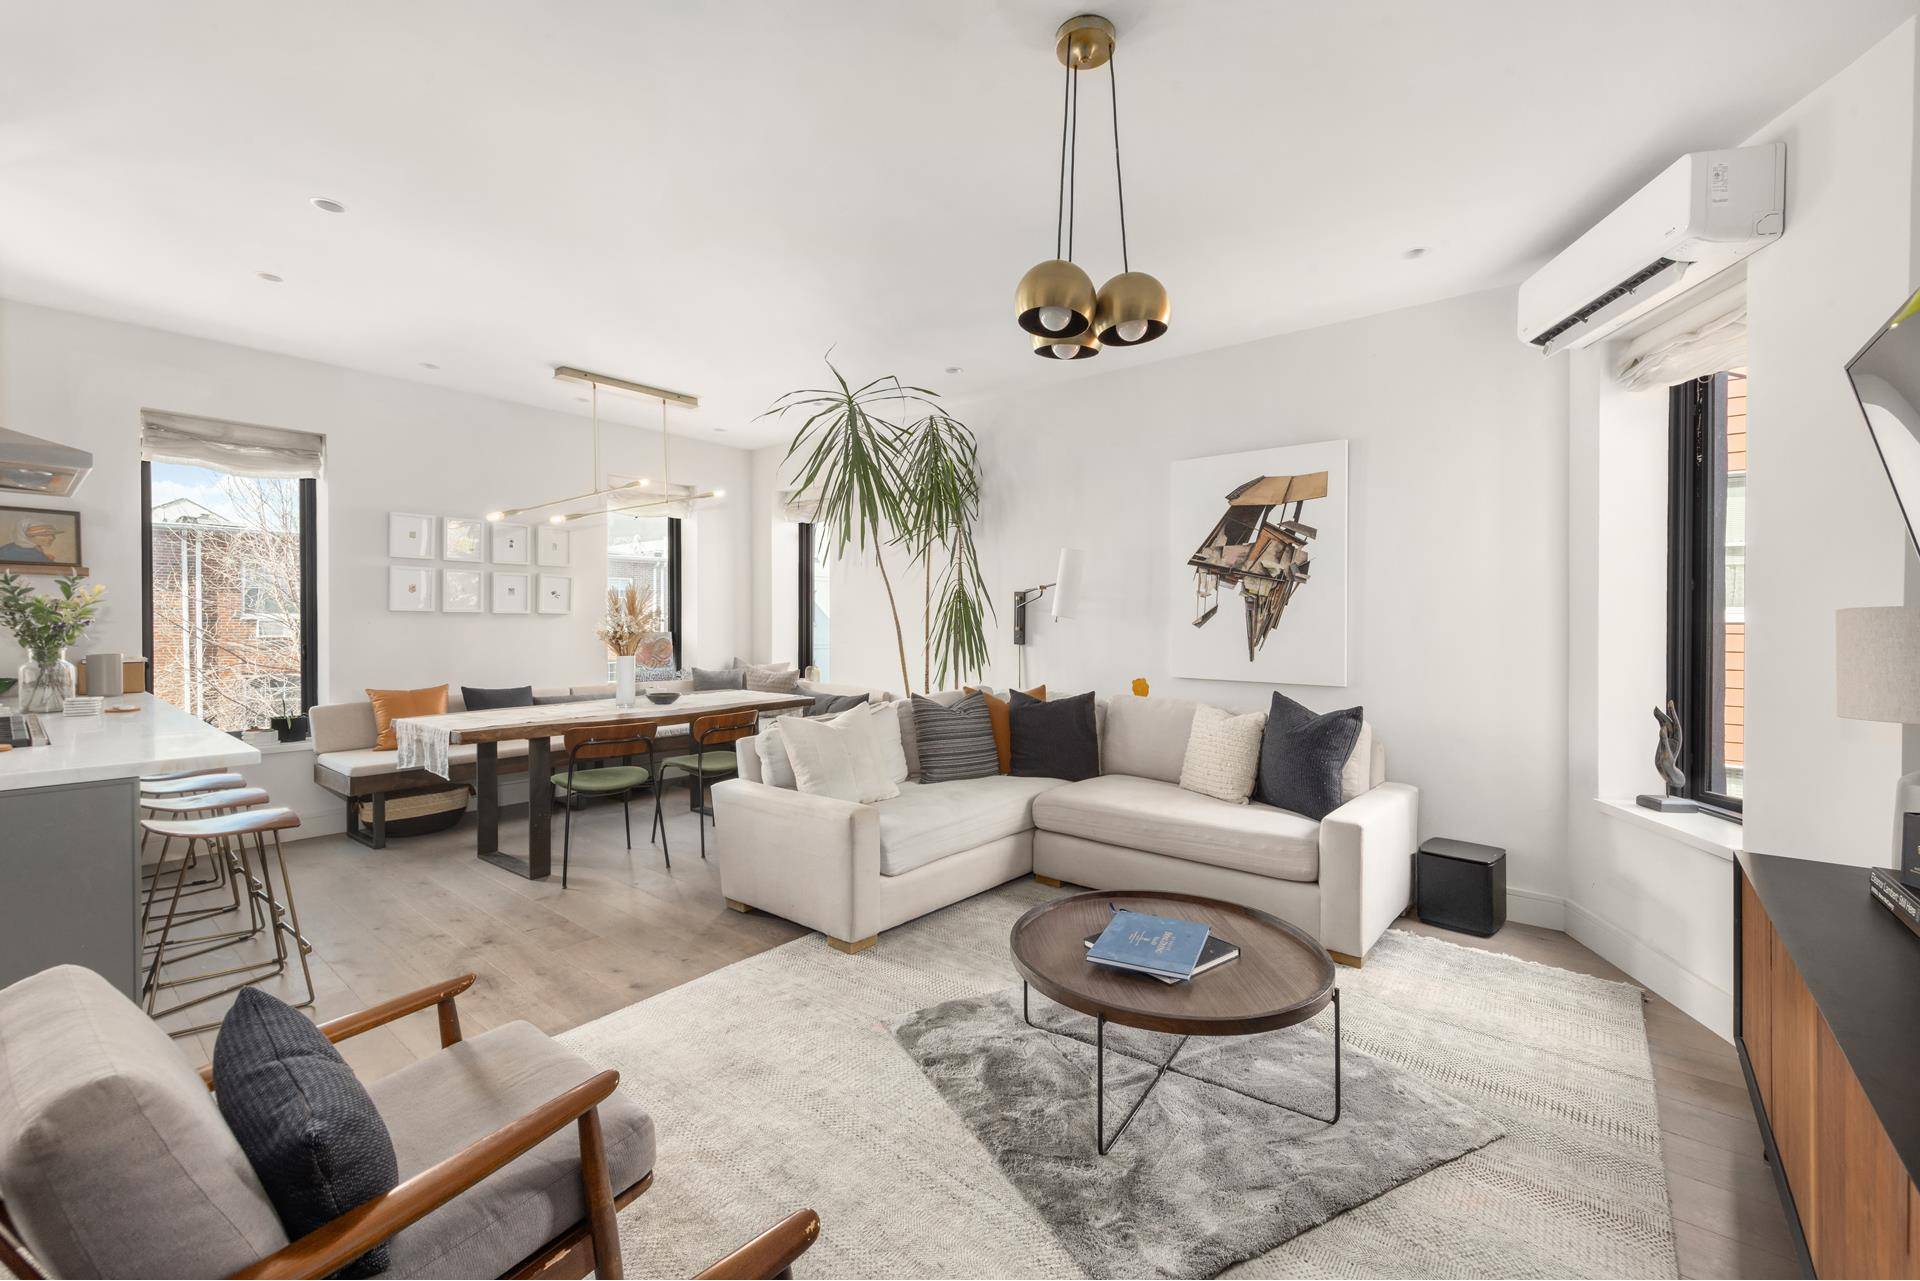 47 Orient Avenue is a meticulously renovated sun filled duplex three bedroom, three bath home on a serene tree lined street in the heart of East Williamsburg.